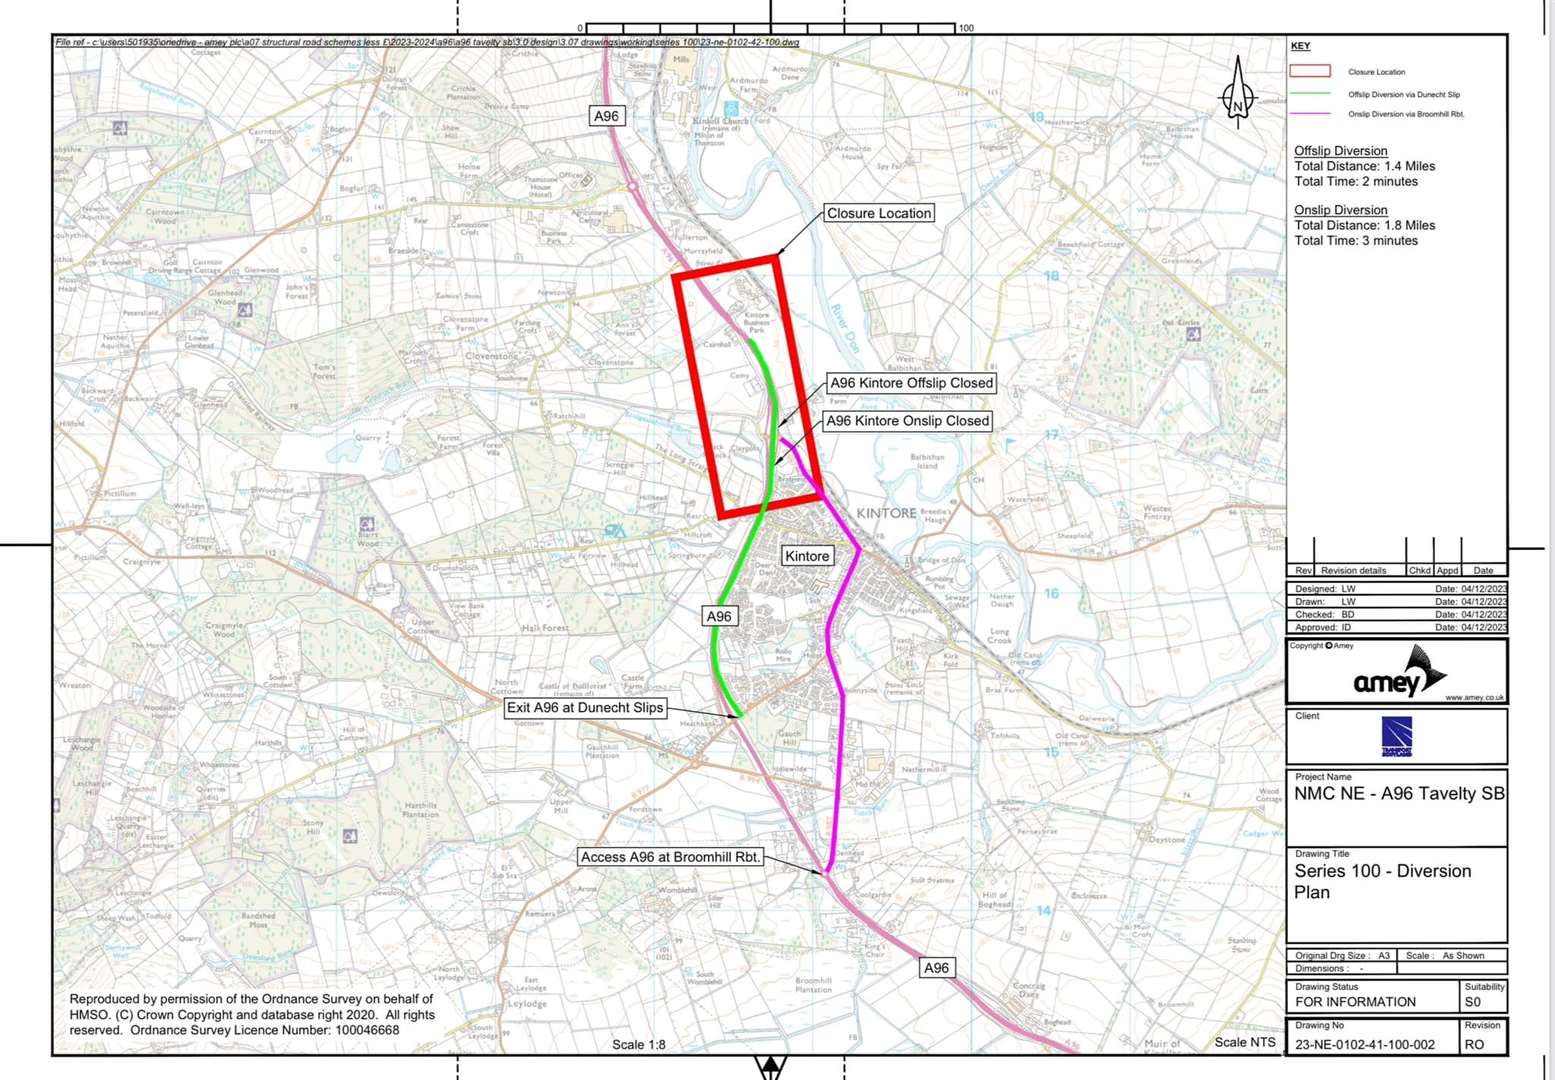 Work will be carried out at Kintore on the A96